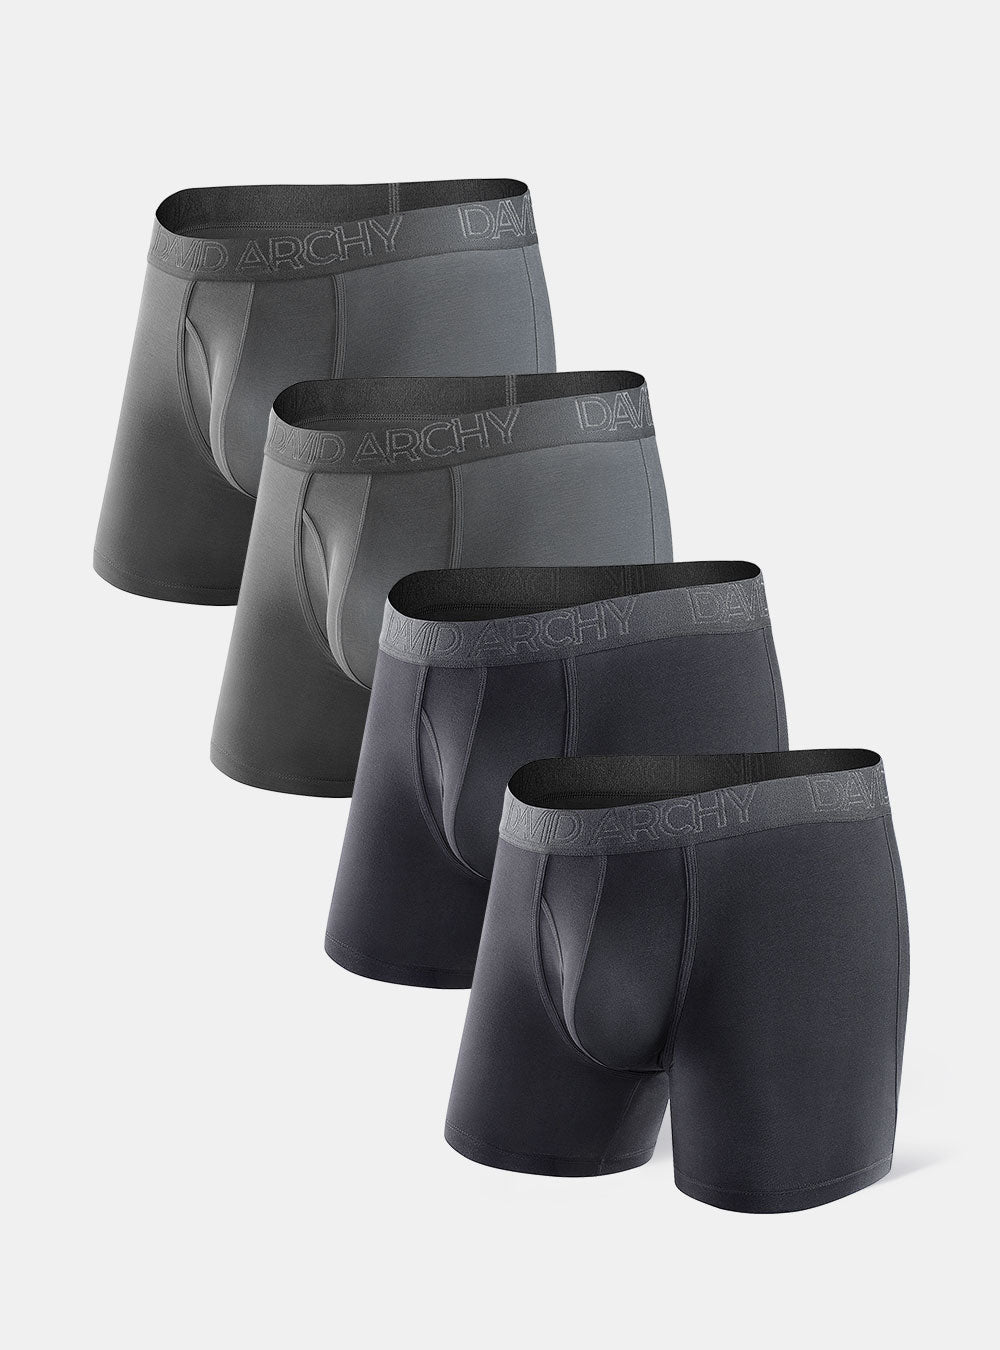 David Archy 4 Packs Trunks Bamboo Rayon Breathable Soft Underwear ...